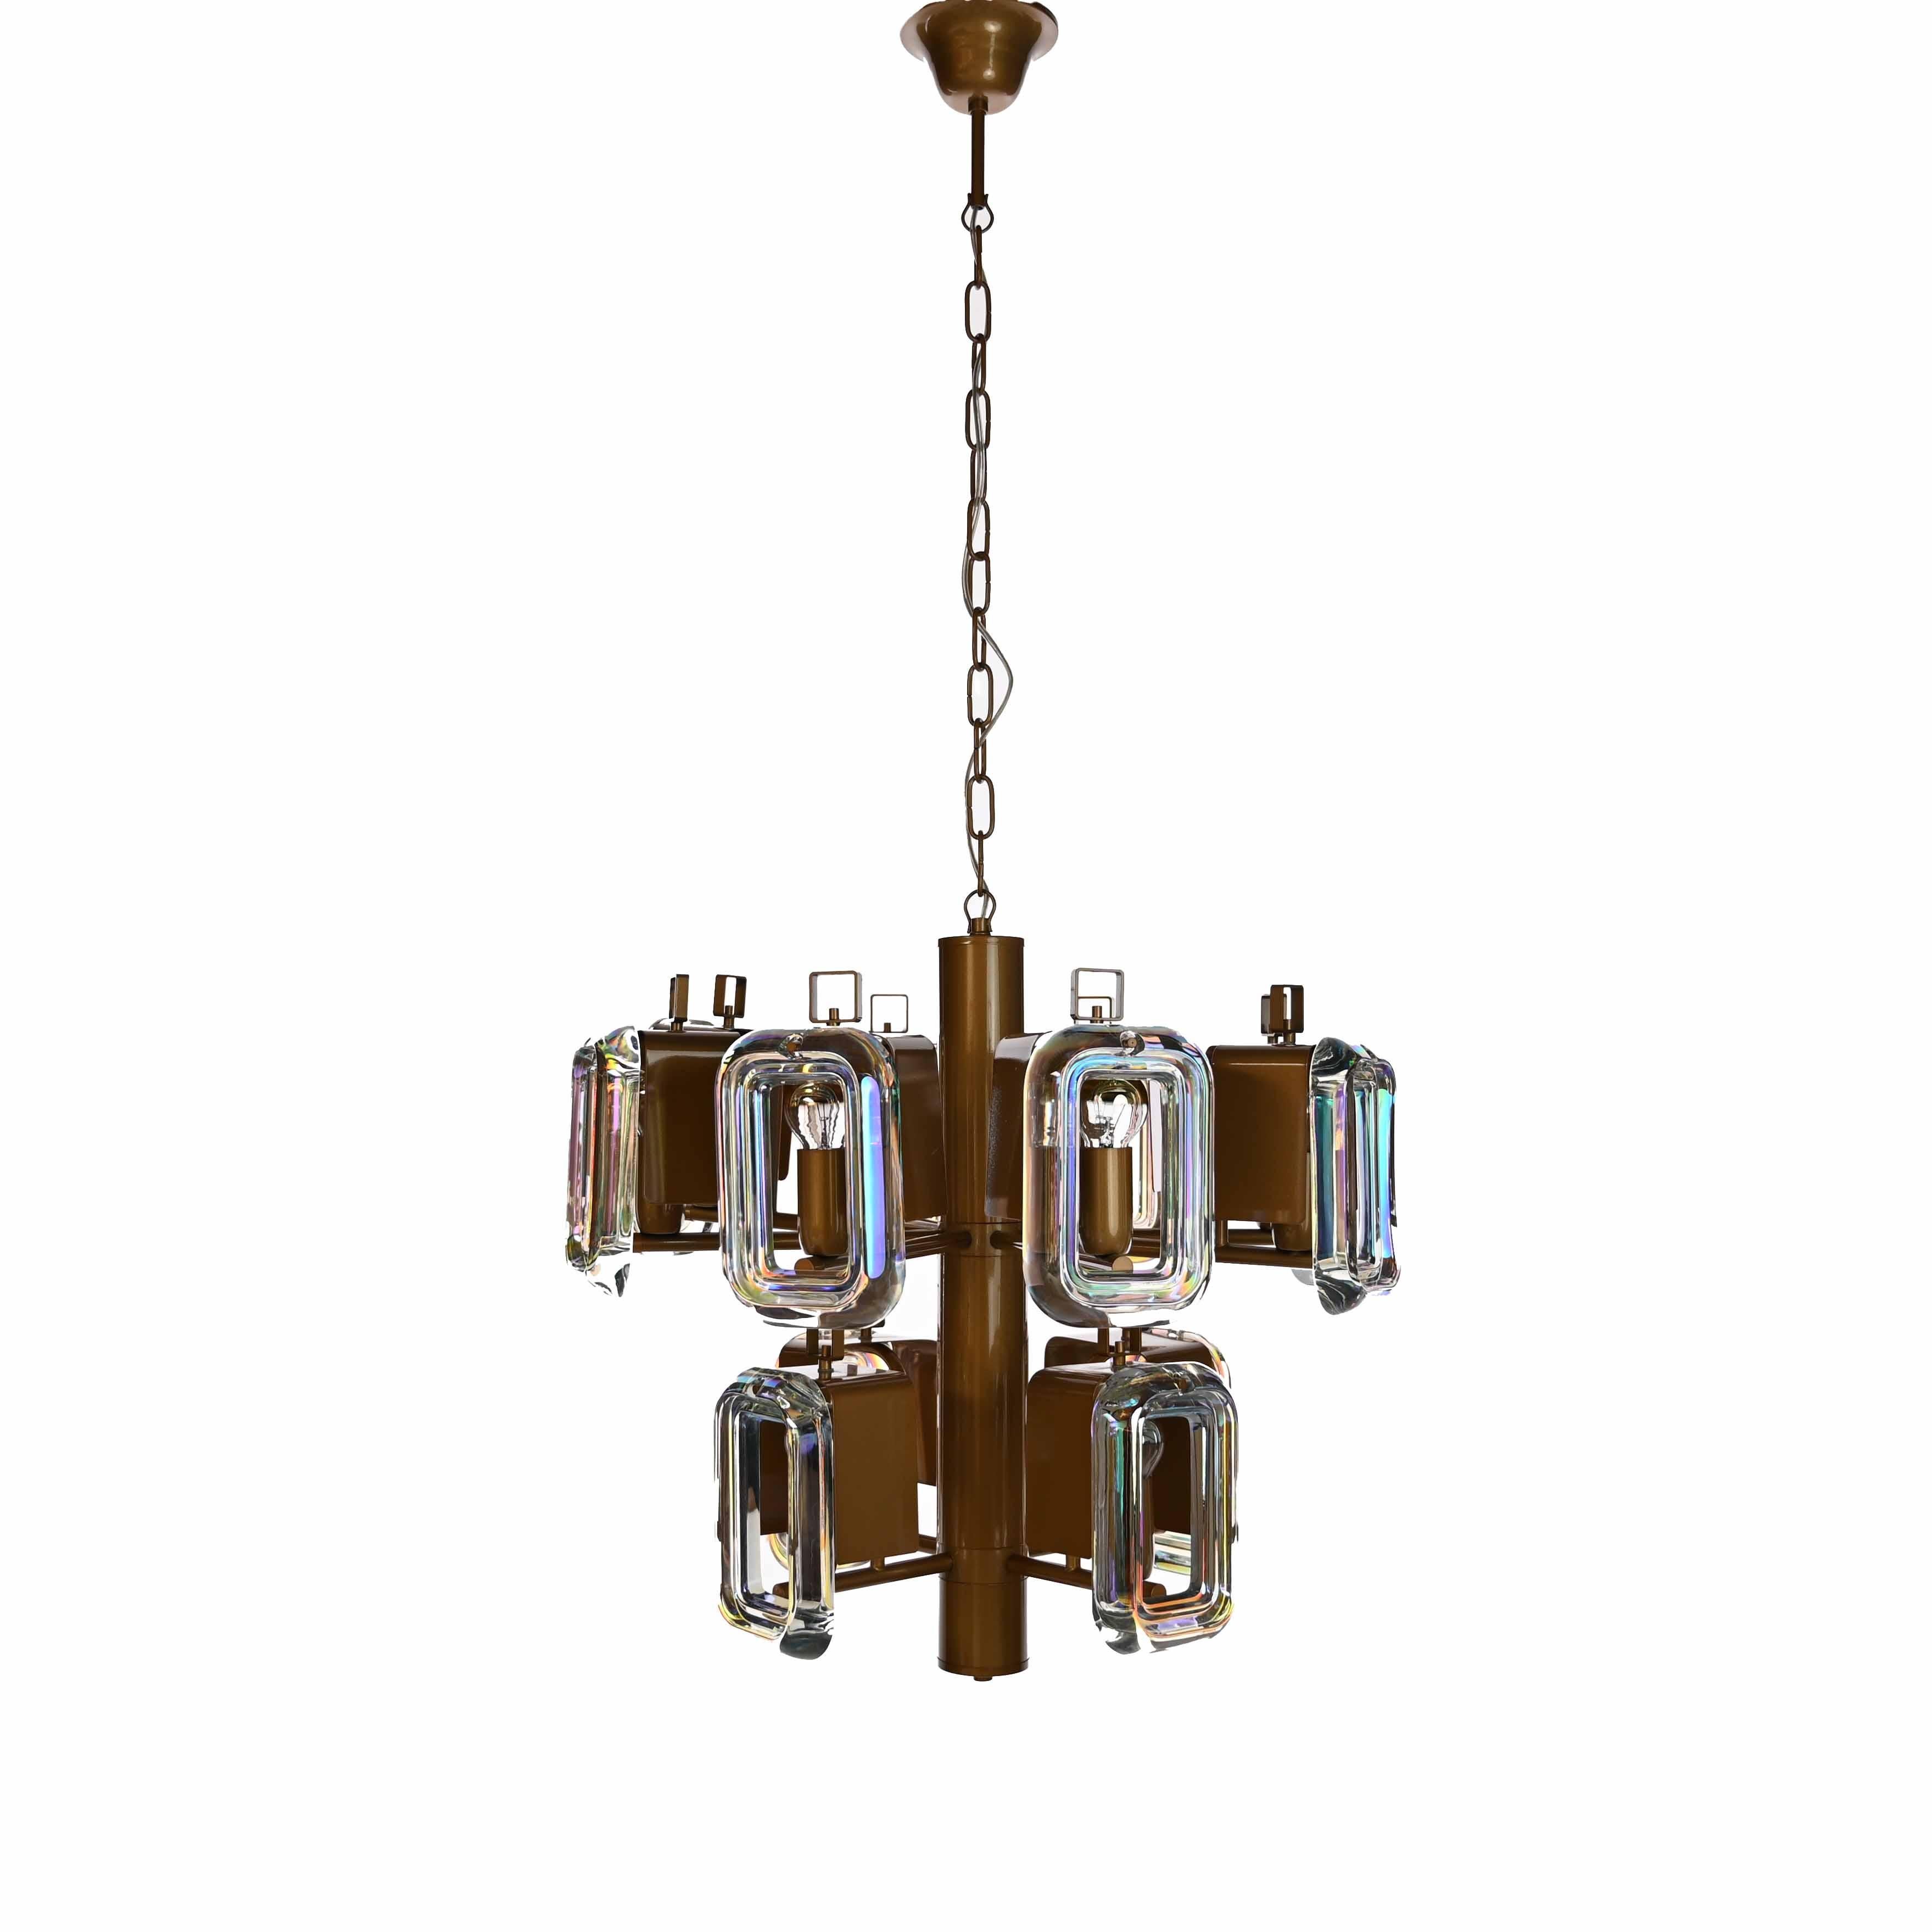 Sleek robust chandelier from 1970s with a coated frame and beautiful thick iridescent square glass pieces. Two tiers with twelve square glass plates attached and twelve E14 lightbulbs.
Measures: Height with chain 104 cm, height without chain 50cm,